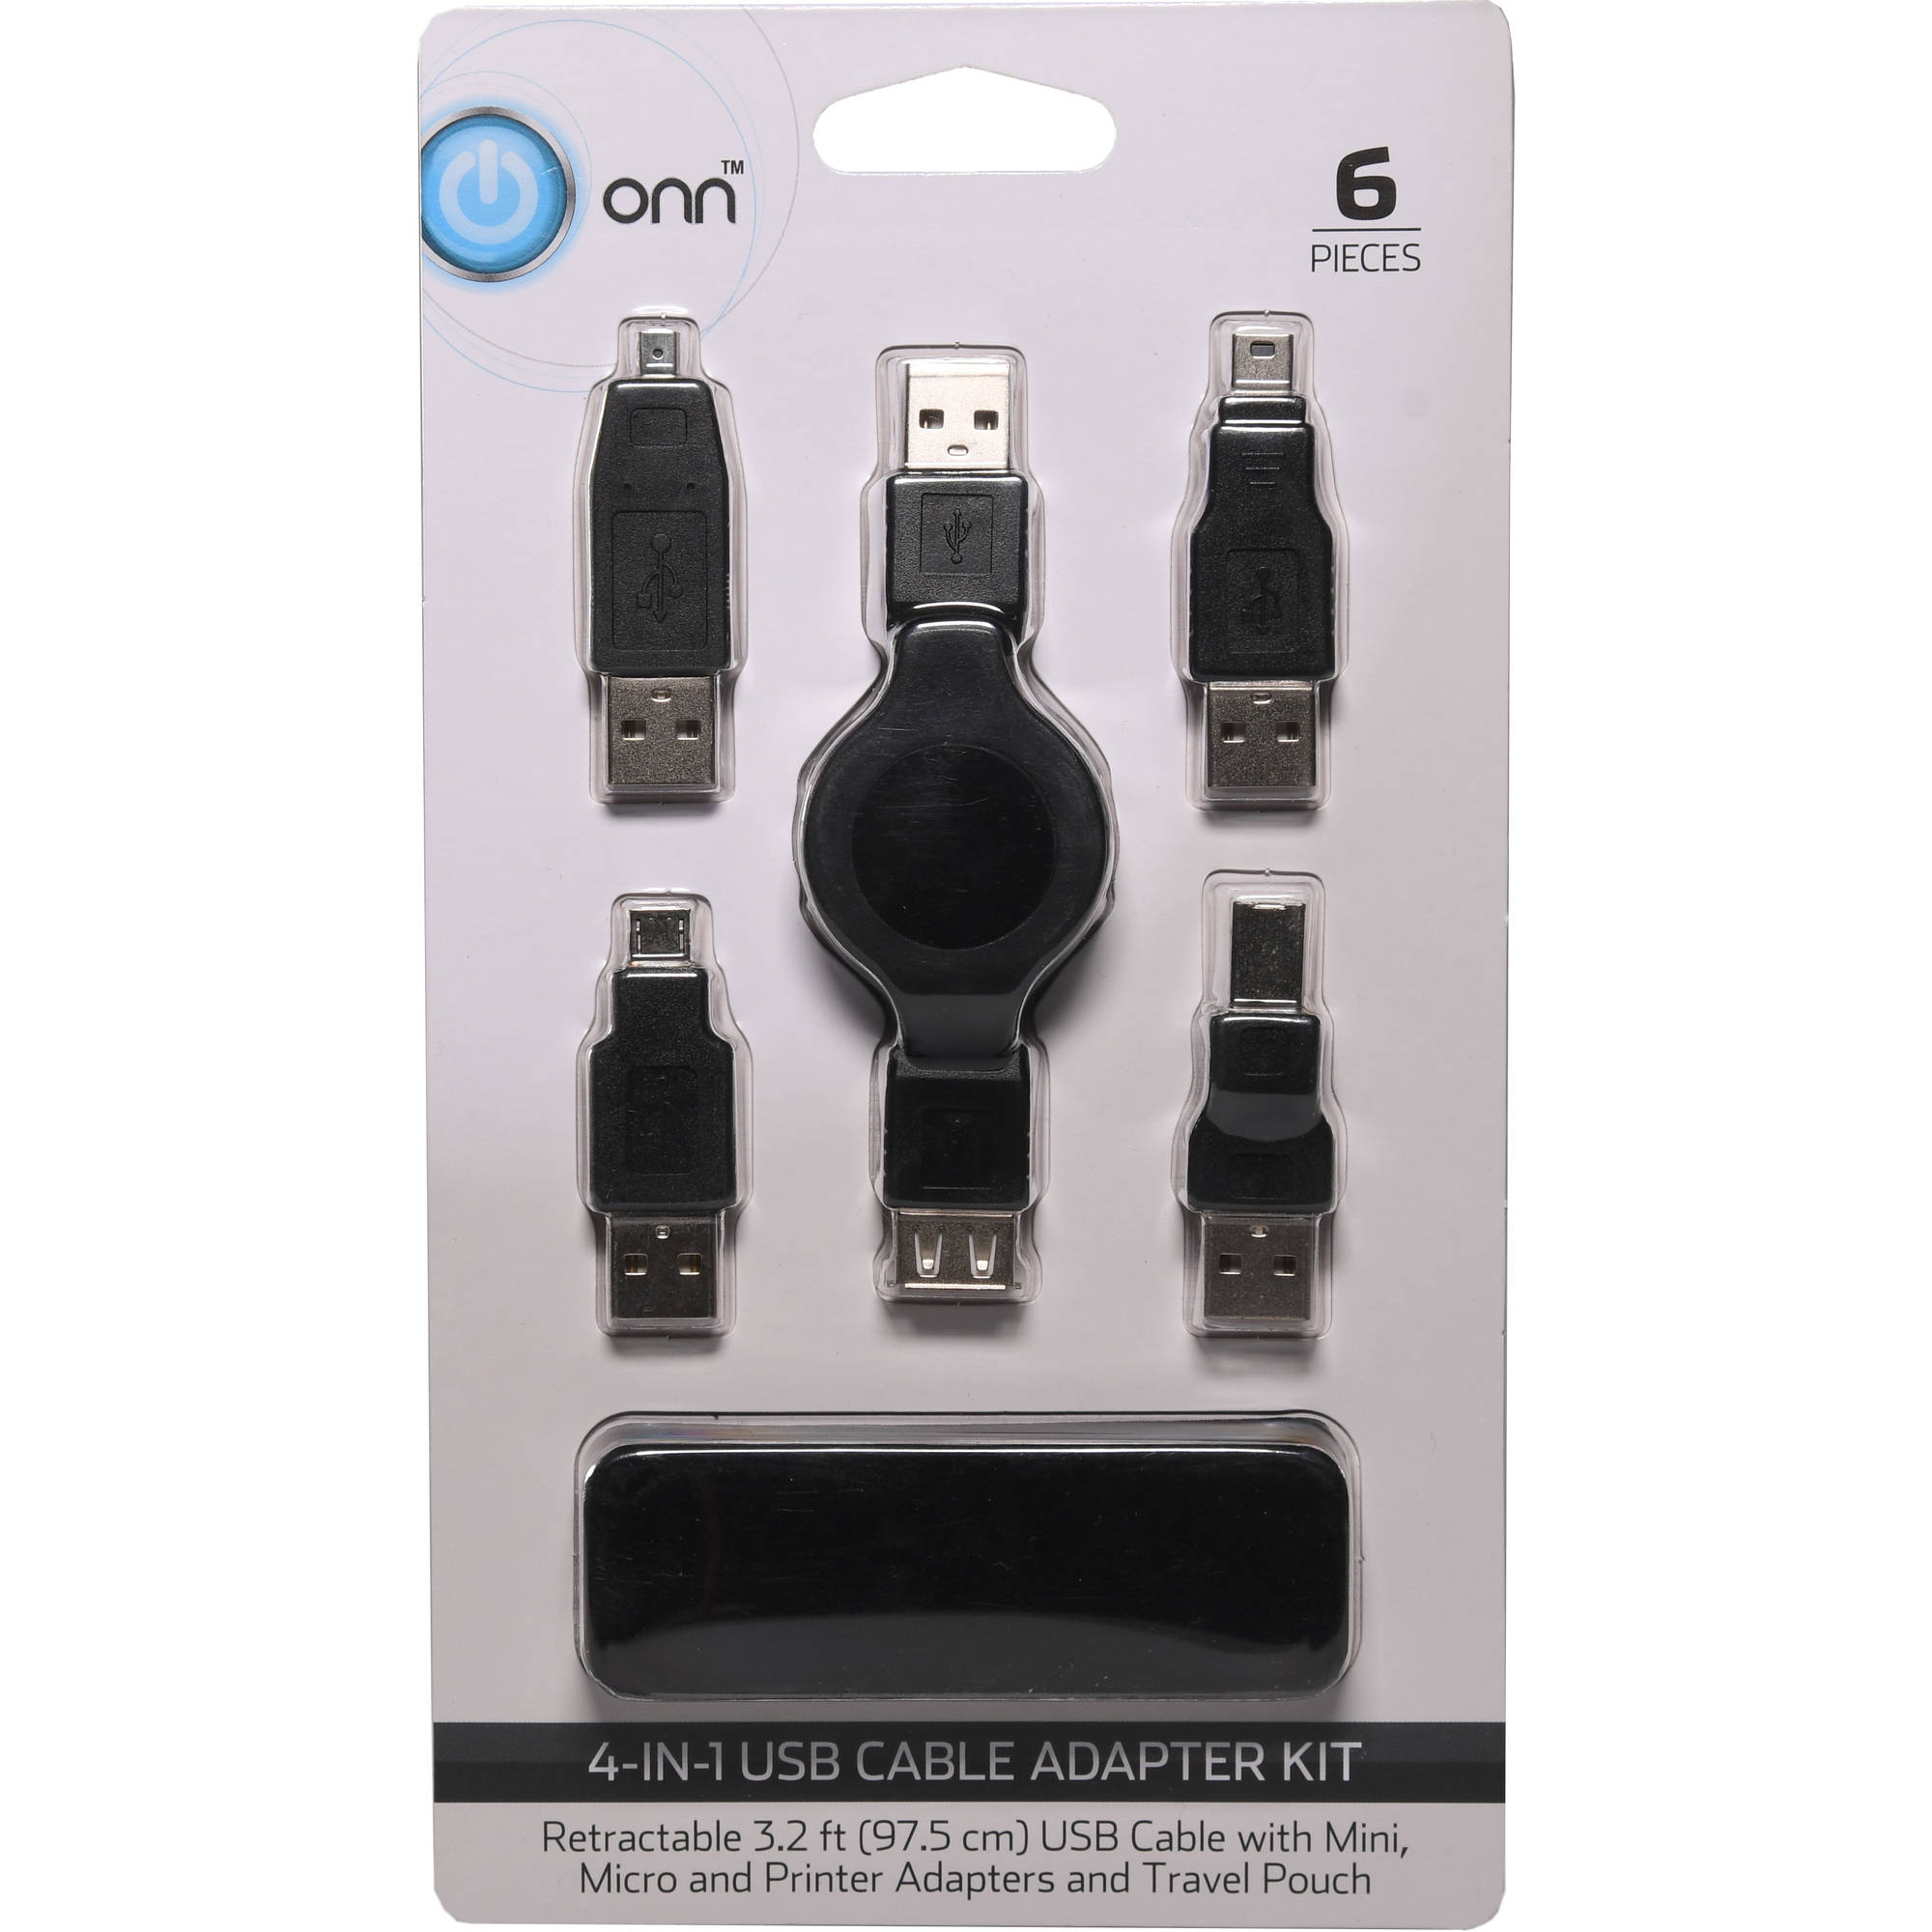 ONN 4-in-1 USB Cable Adapter Kit with Travel Bag - Walmart.com